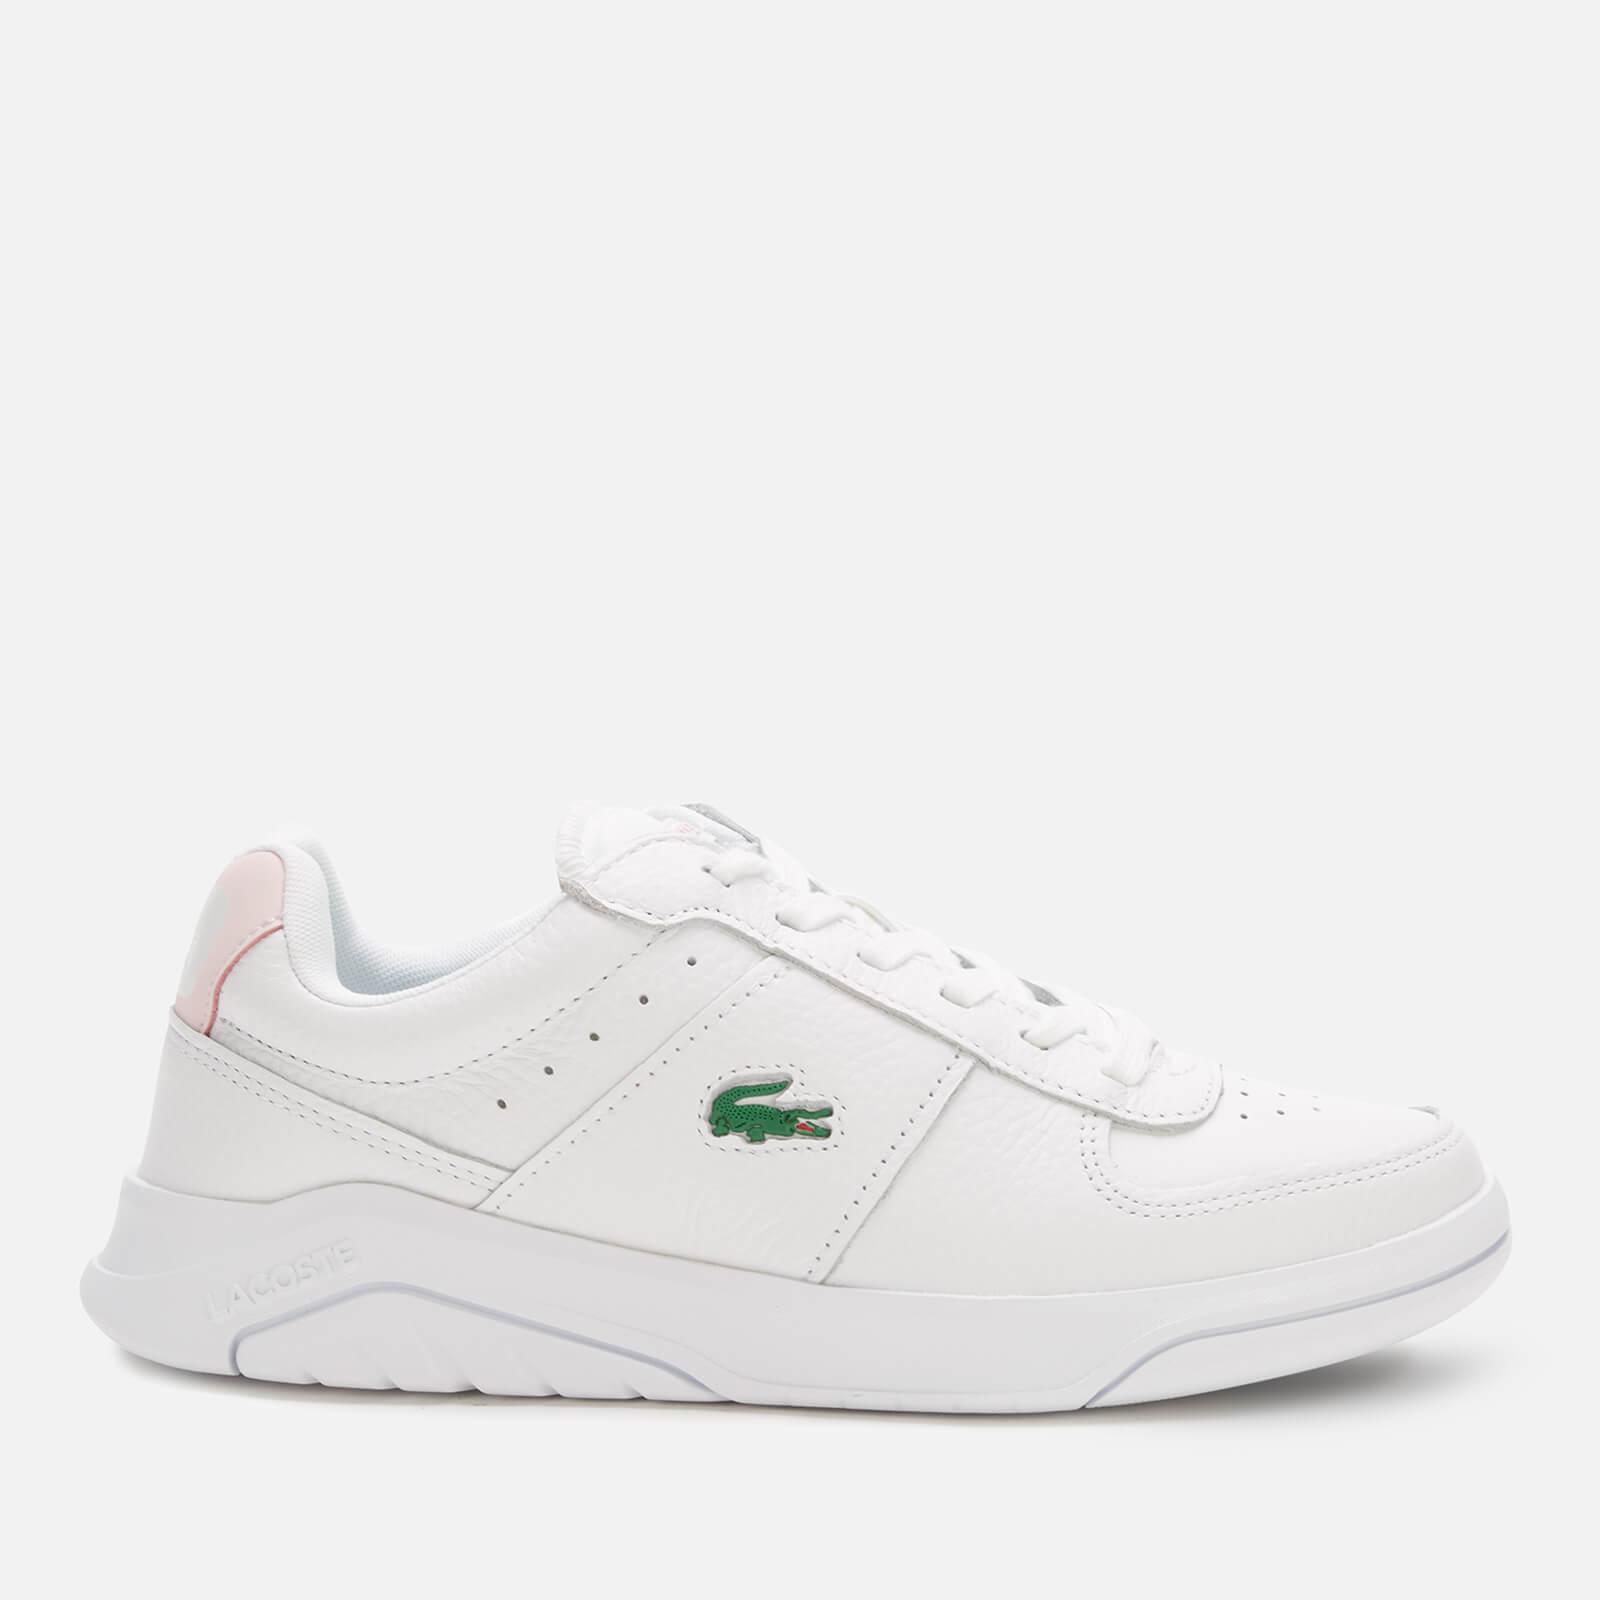 Lacoste Game Advance 0722 1 Nubuck Tennis Style Trainers in White | Lyst